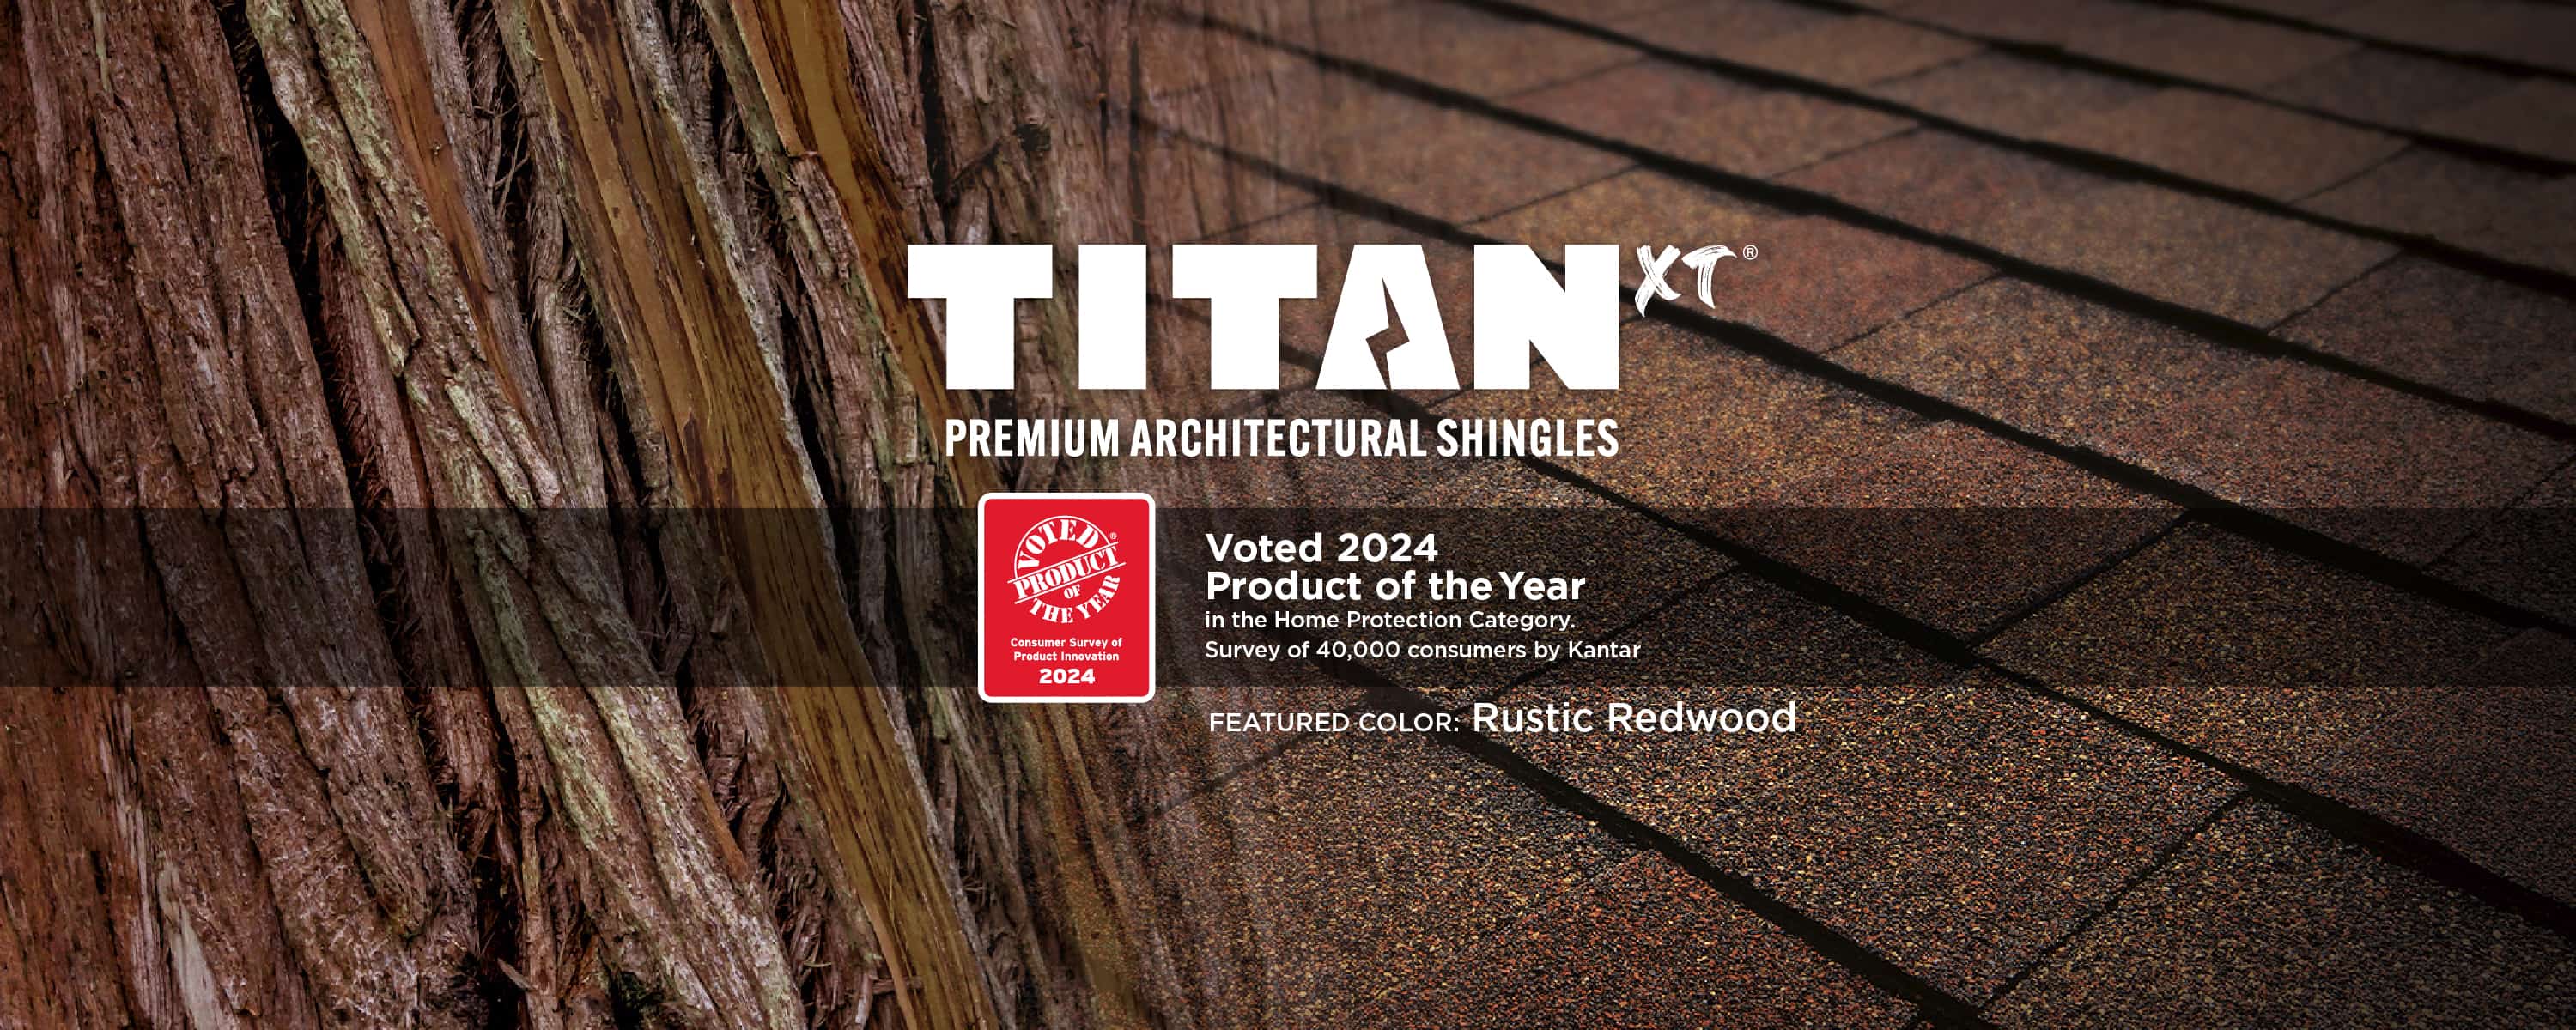 Titan XT 2024 Product of the Year - Rustic Redwood